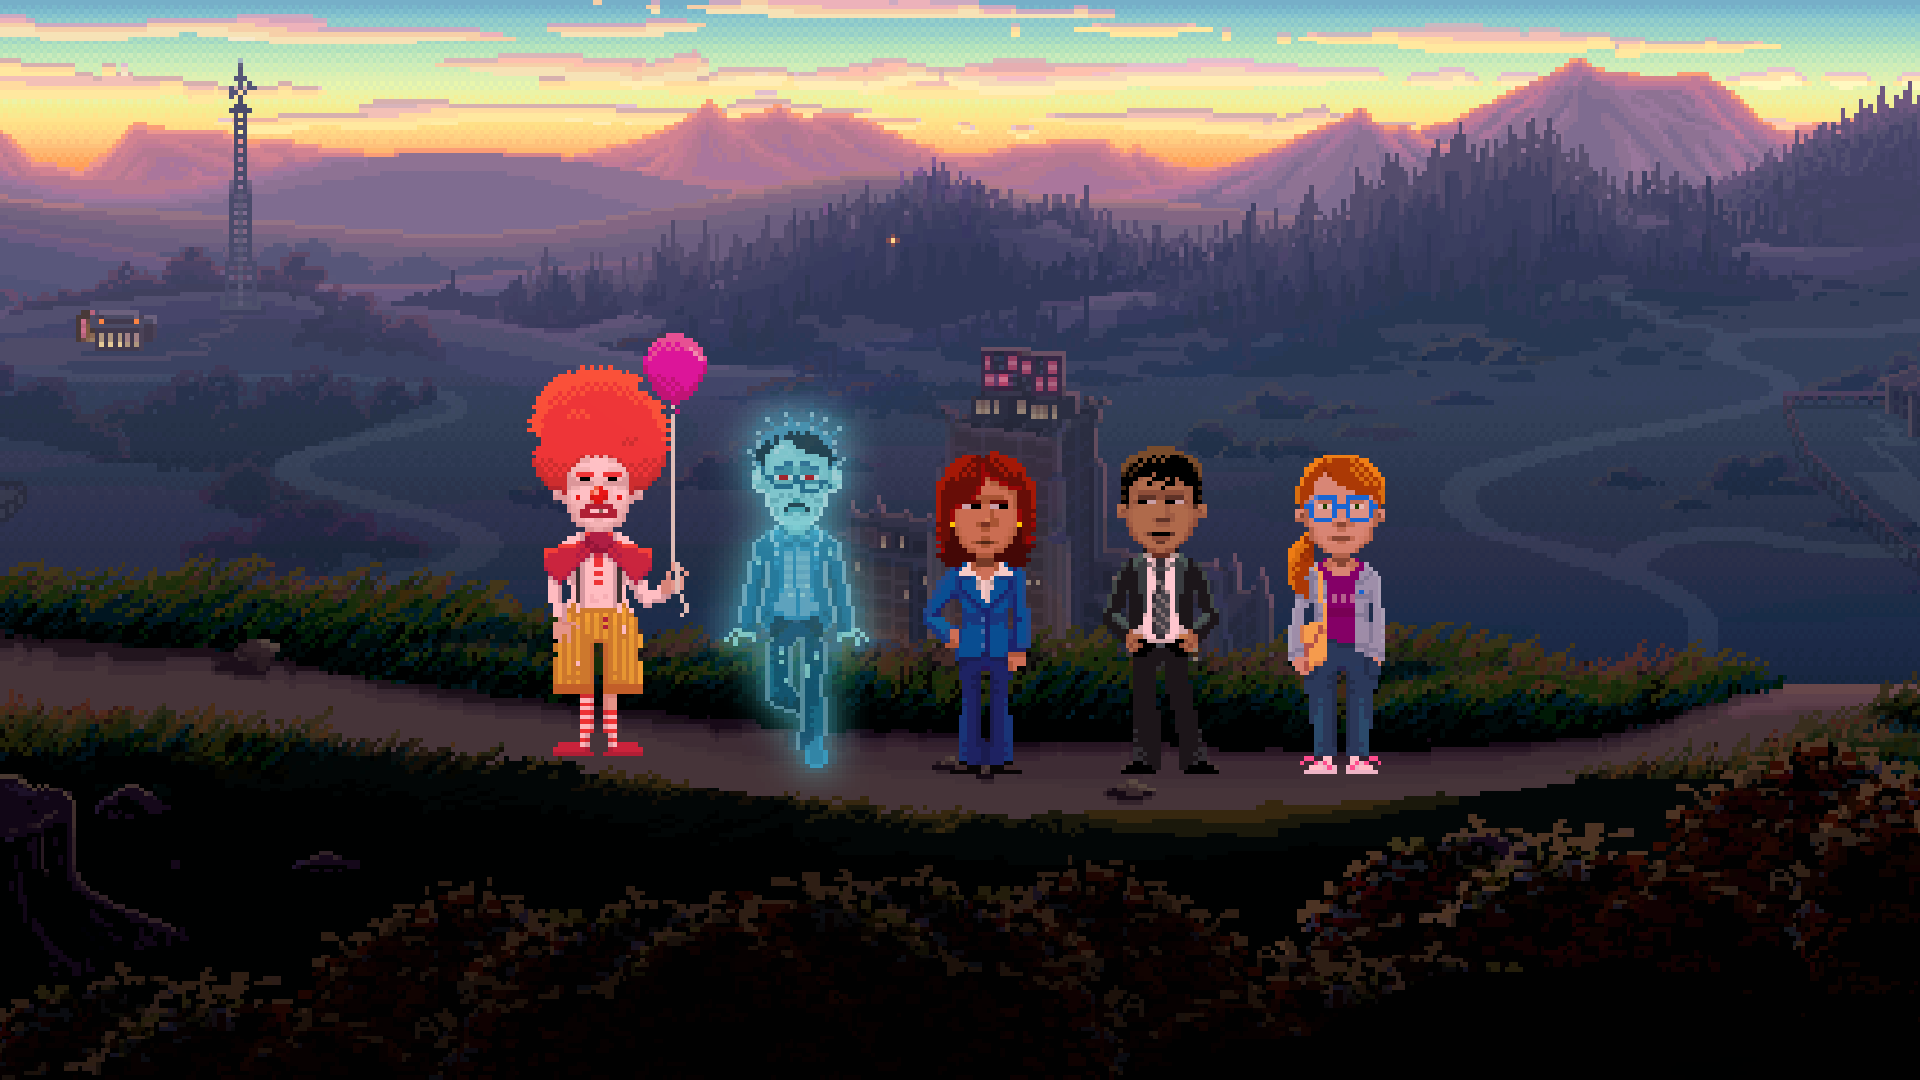 android, iOS, PC, PS4, Ron Gilbert, Switch, Terrible Toybox, thimbleweed park, Xbox One